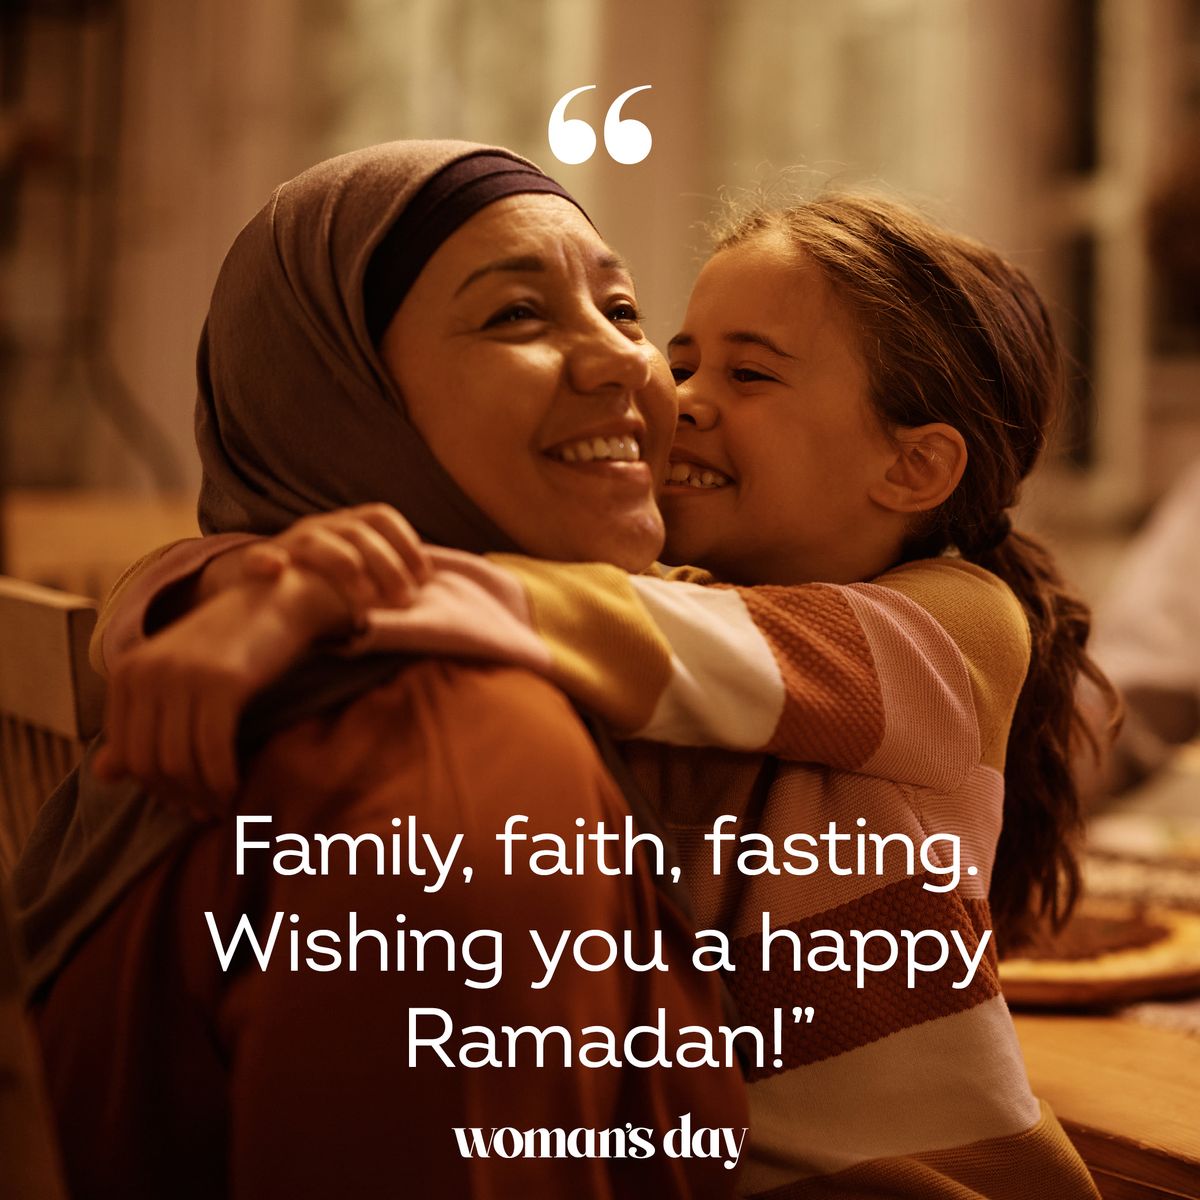 75 ramadan greetings to share this holy month